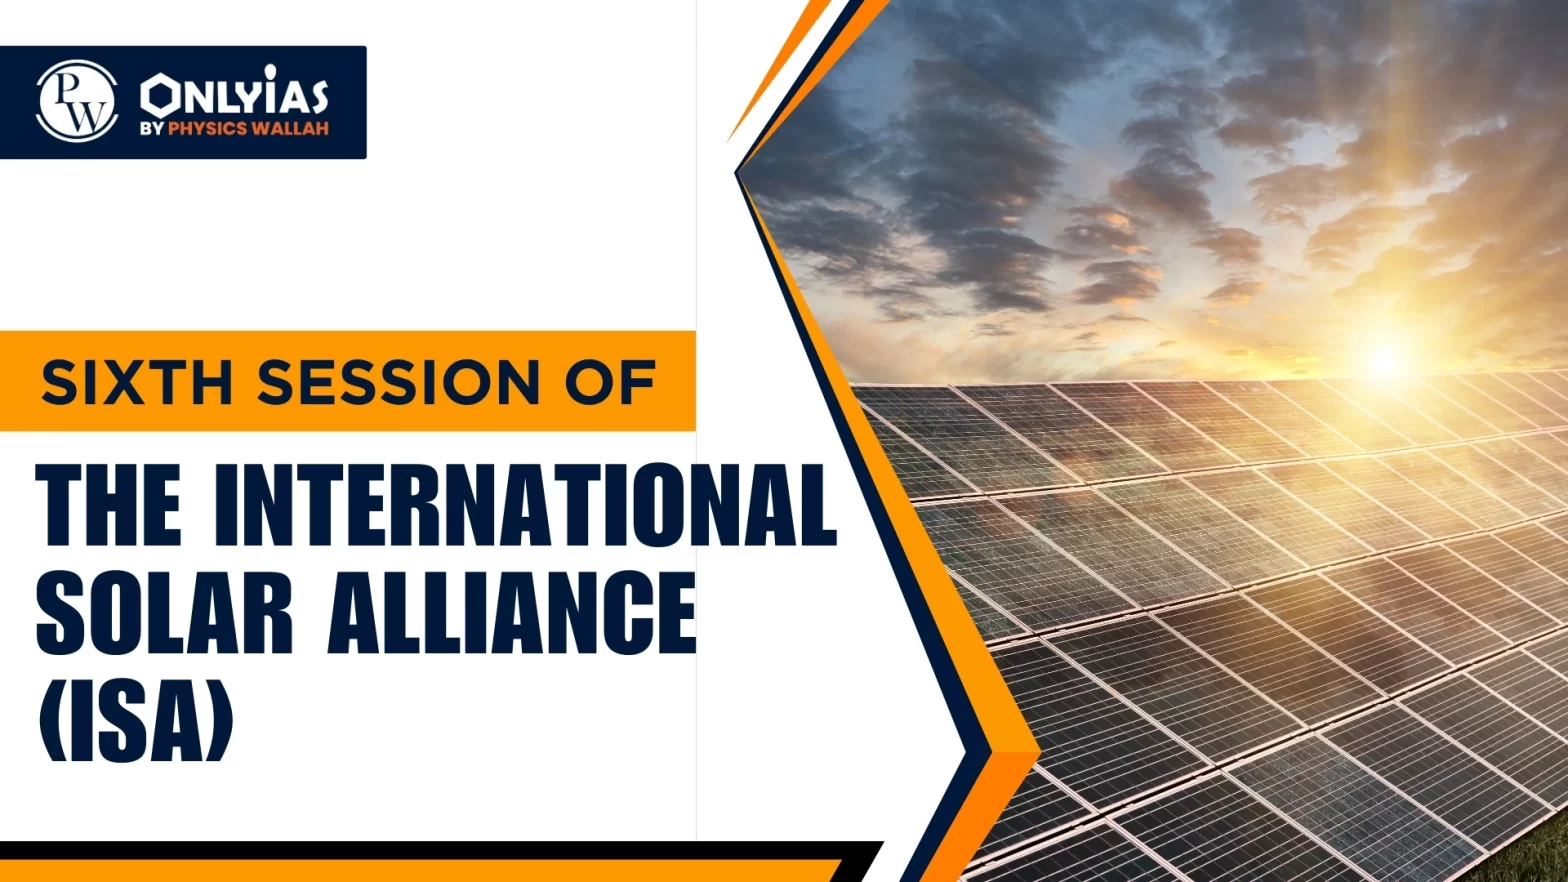 Sixth Session of the International Solar Alliance (ISA)